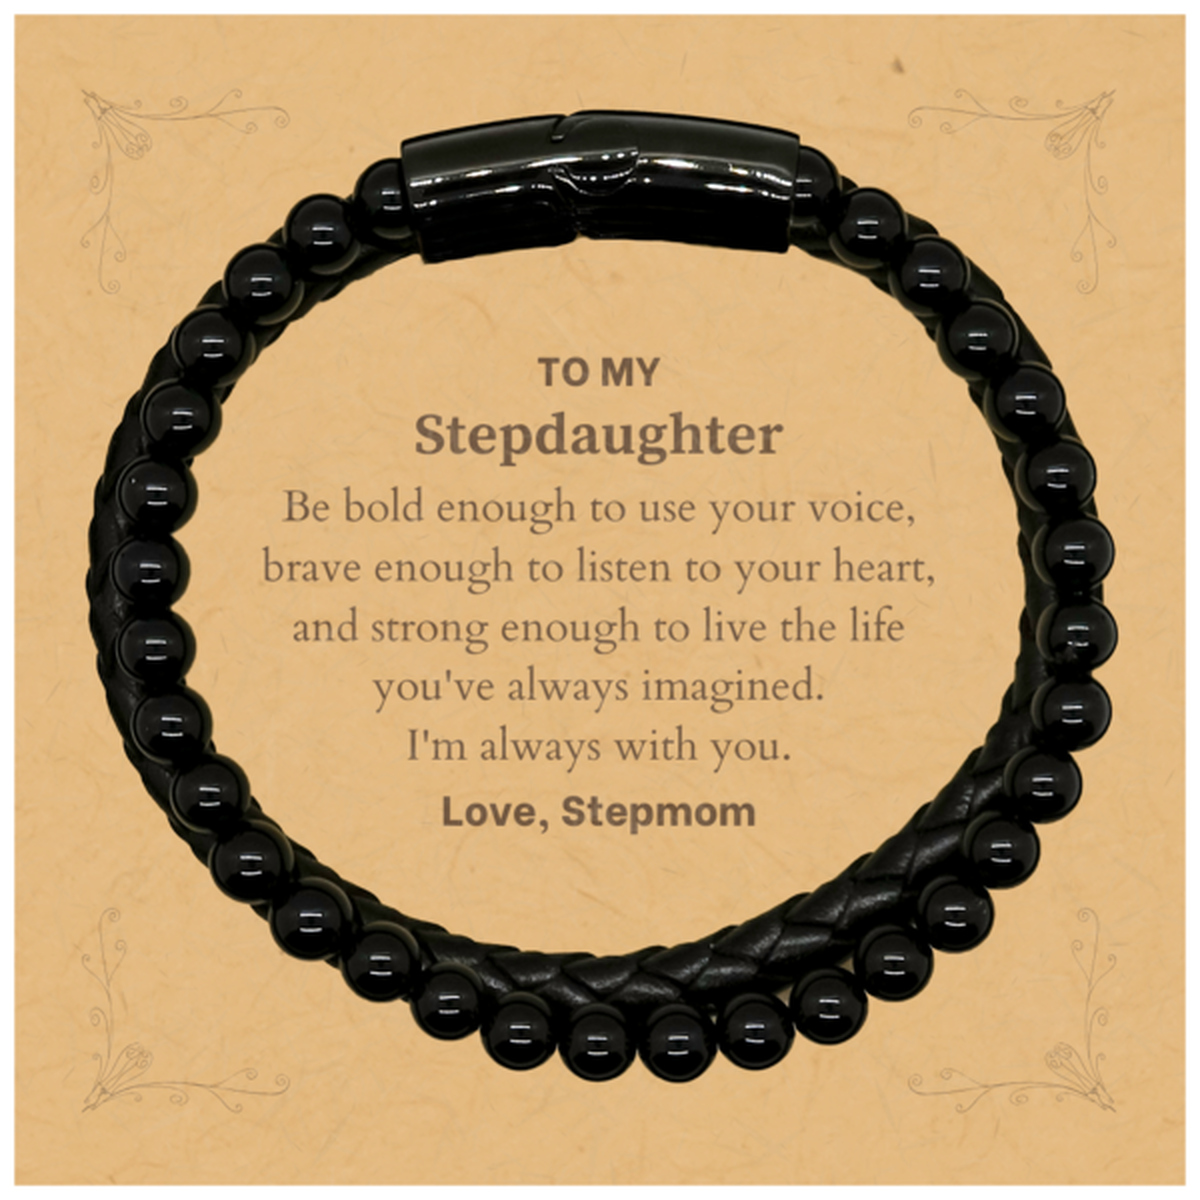 Keepsake Stepdaughter Stone Leather Bracelets Gift Idea Graduation Christmas Birthday Stepdaughter from Stepmom, Stepdaughter Be bold enough to use your voice, brave enough to listen to your heart. Love, Stepmom